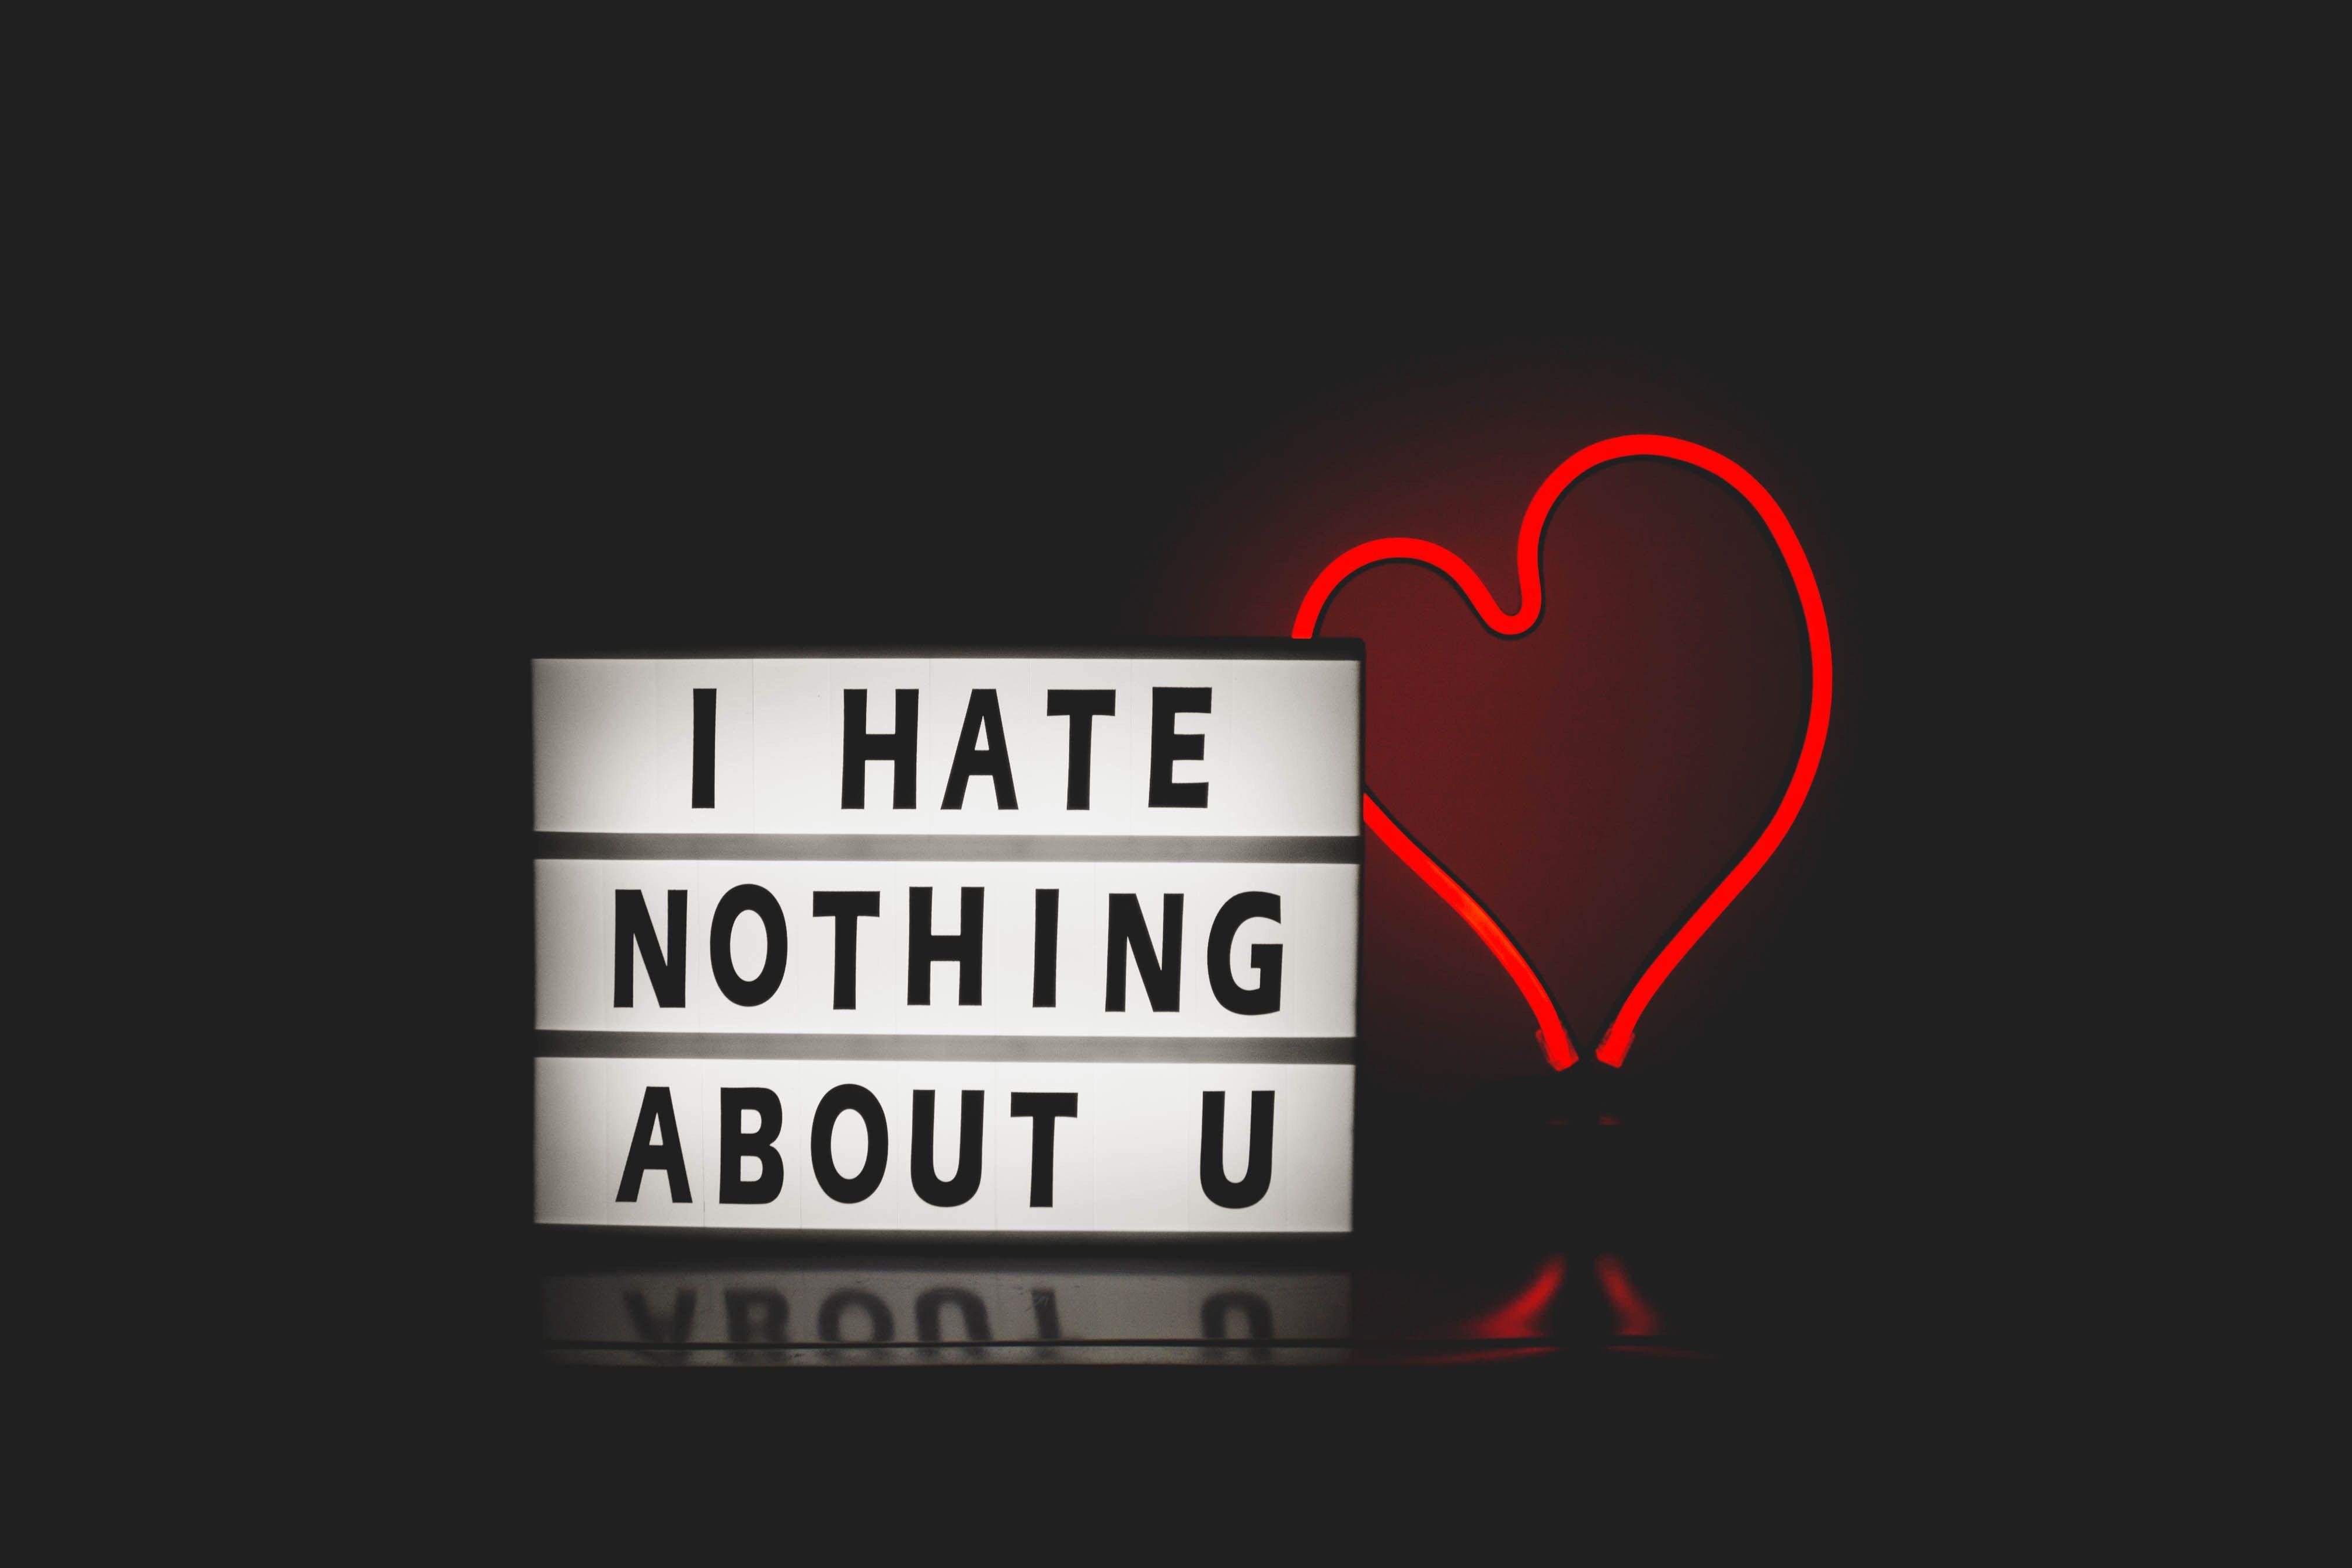 Hd Wallpaper Hate Love For Mobile